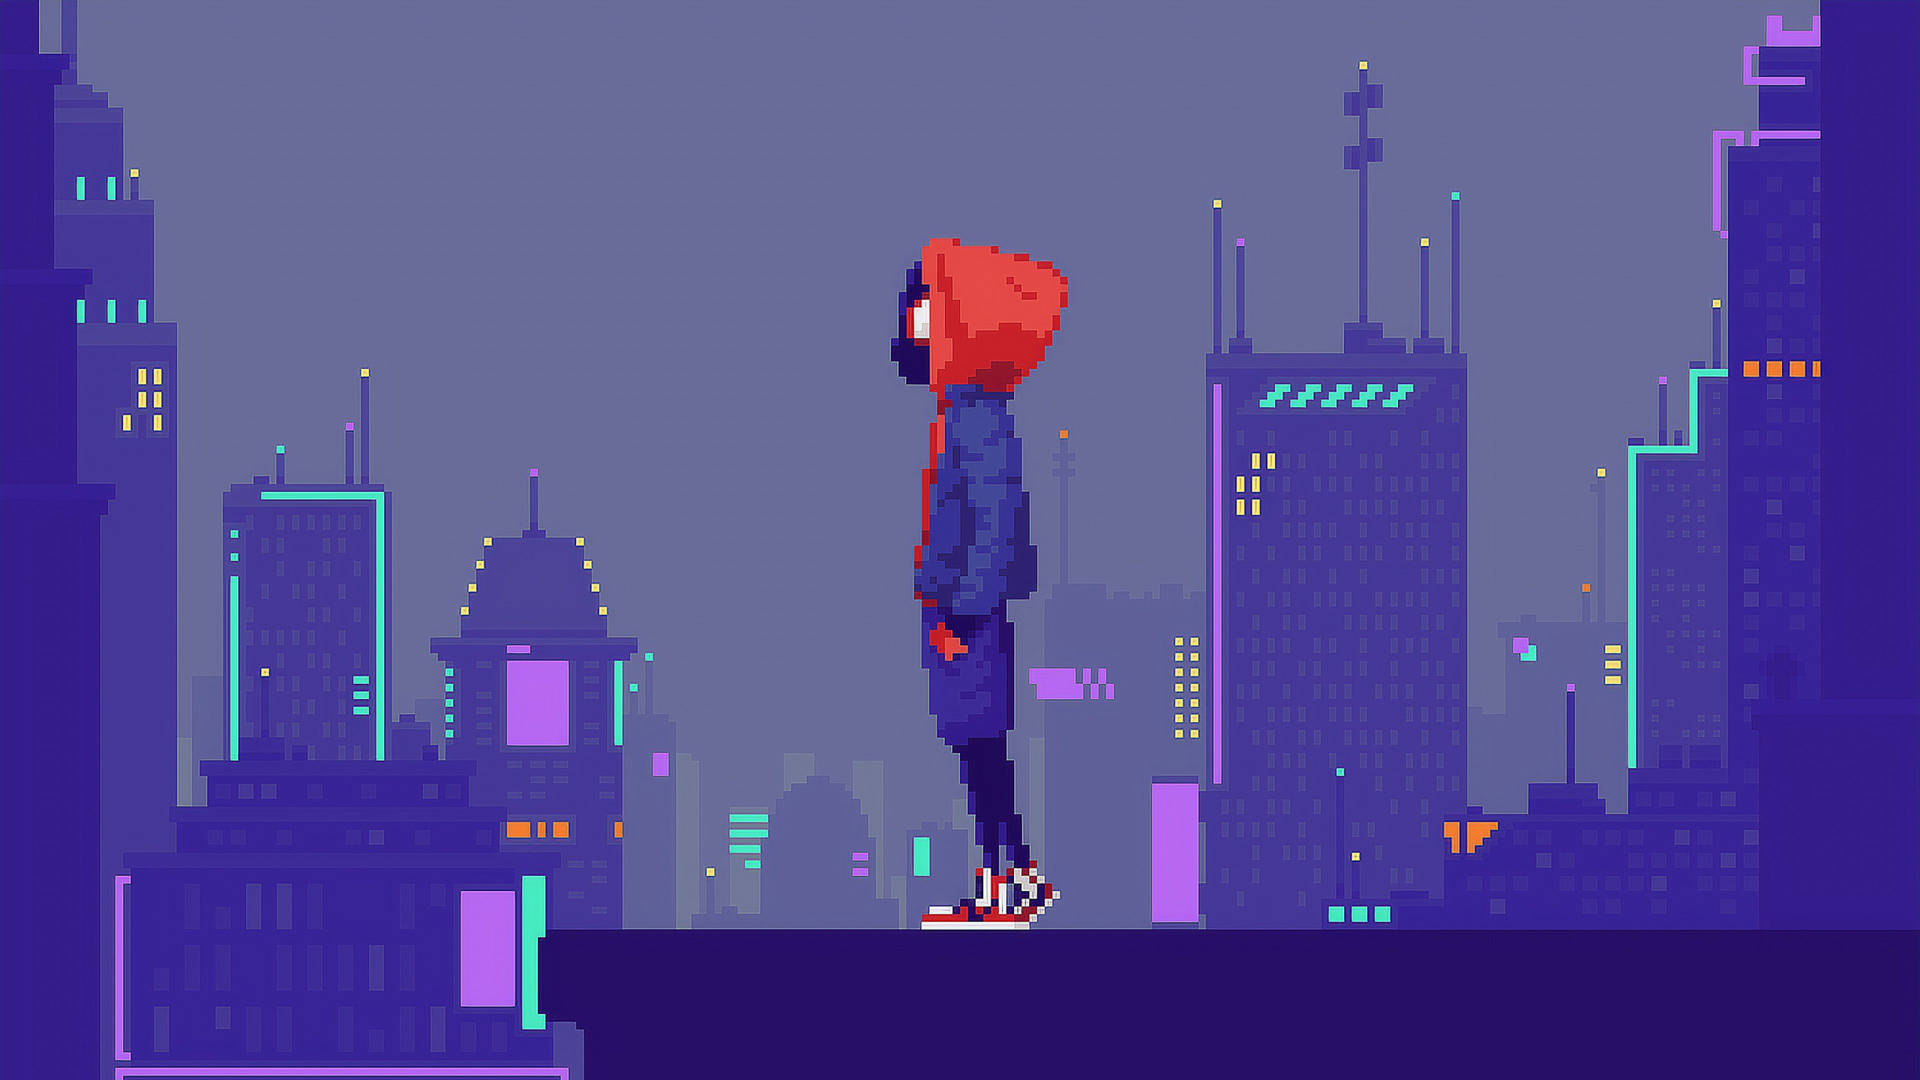 A red haired girl in a blue coat stands on a ledge in a cyberpunk city - Pixel art